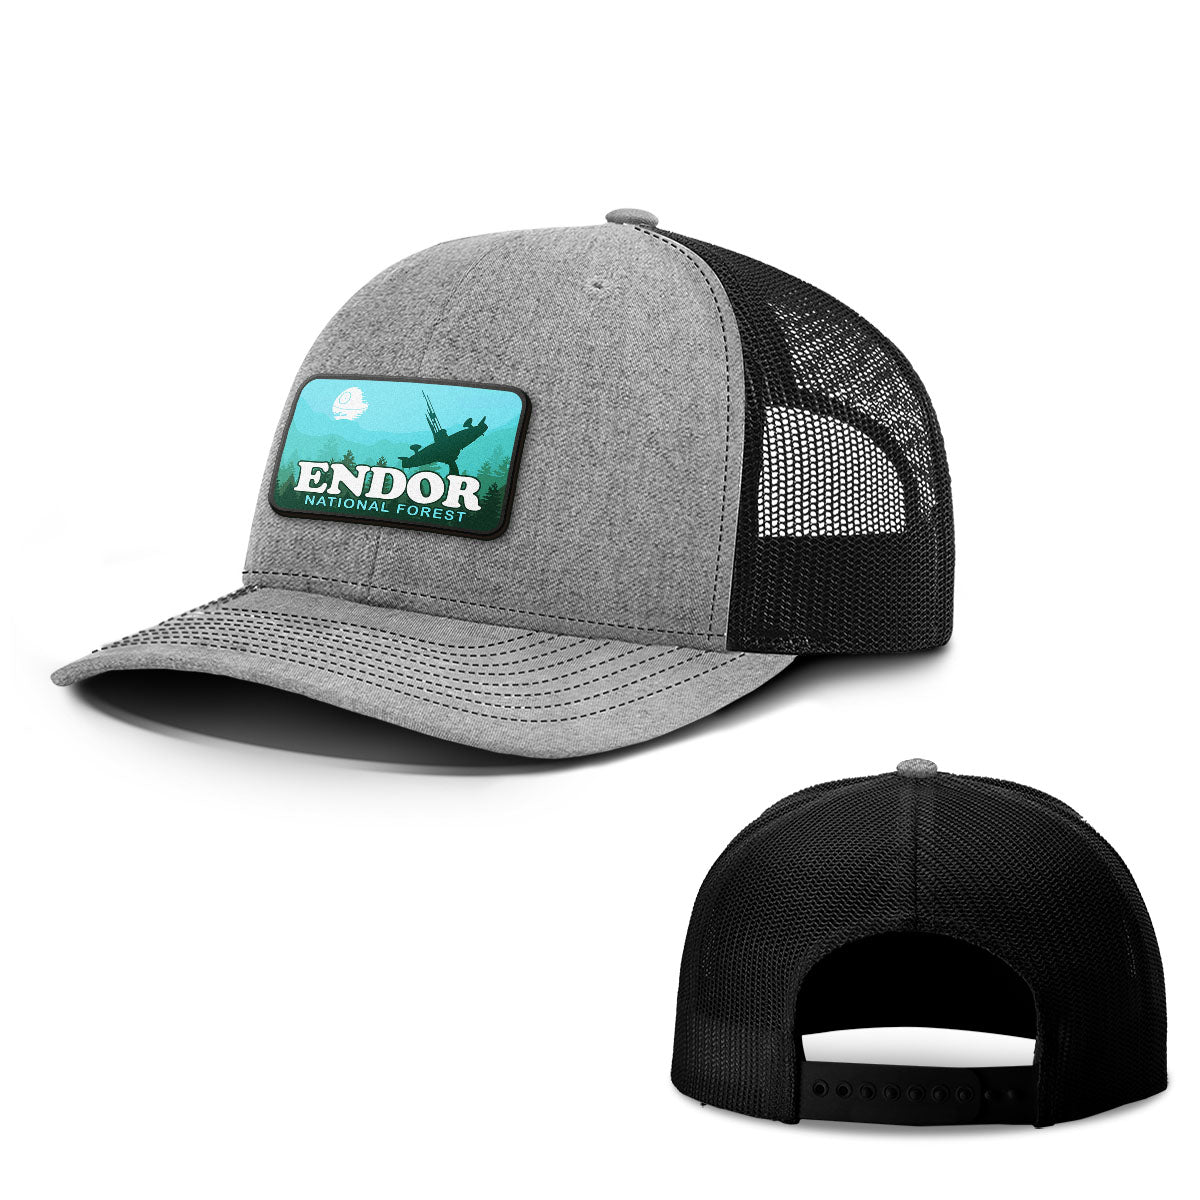 Endor National Forest Patch Hats